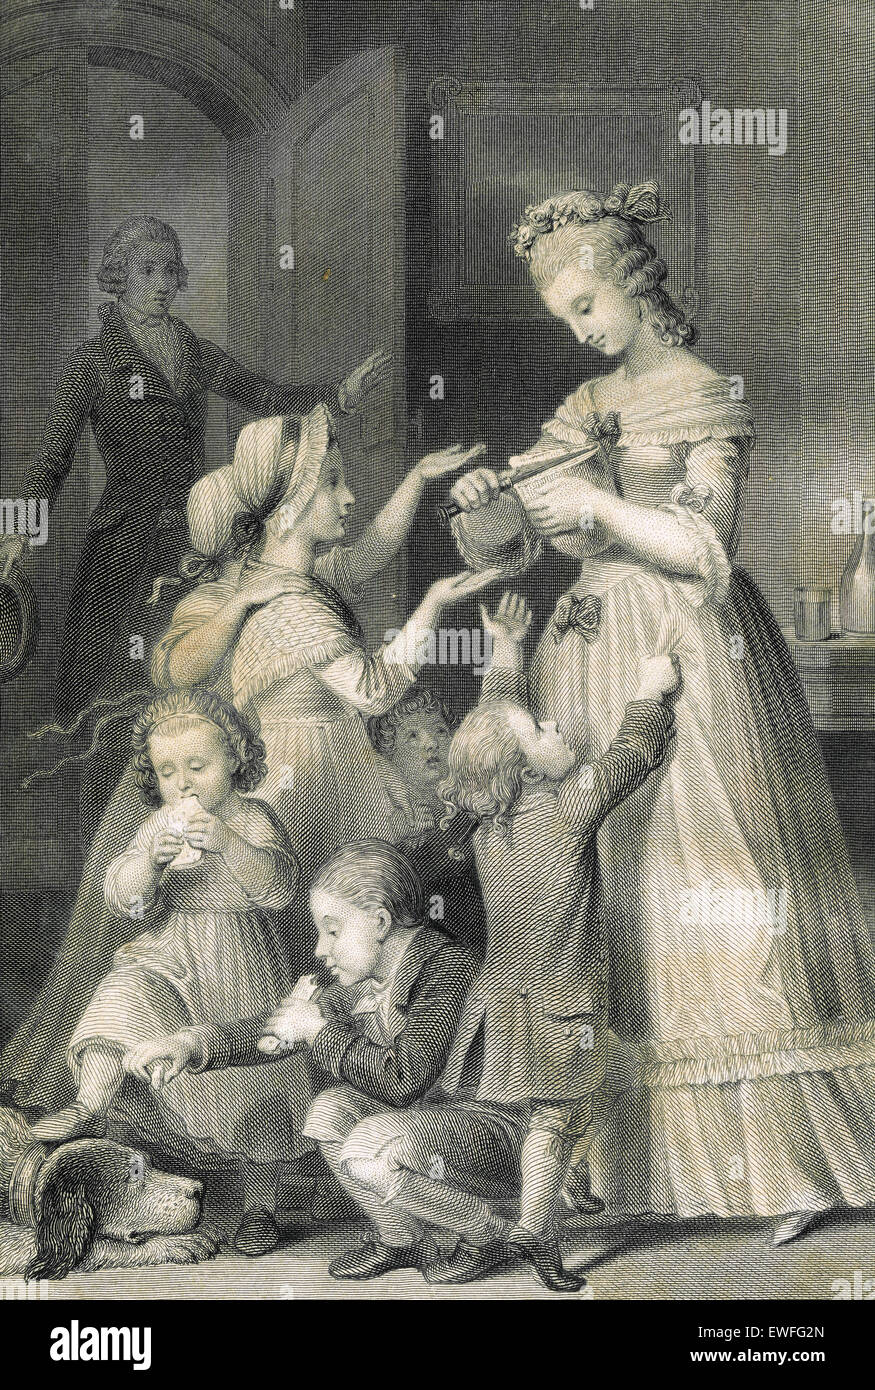 Johann Wolfgang von Goethe (1749-1832). German writer. The Sorrows of Young Werther, 1774. Engraving depicting Werther surprises Charlotte surrounded by children. Edition of 1837. Stock Photo